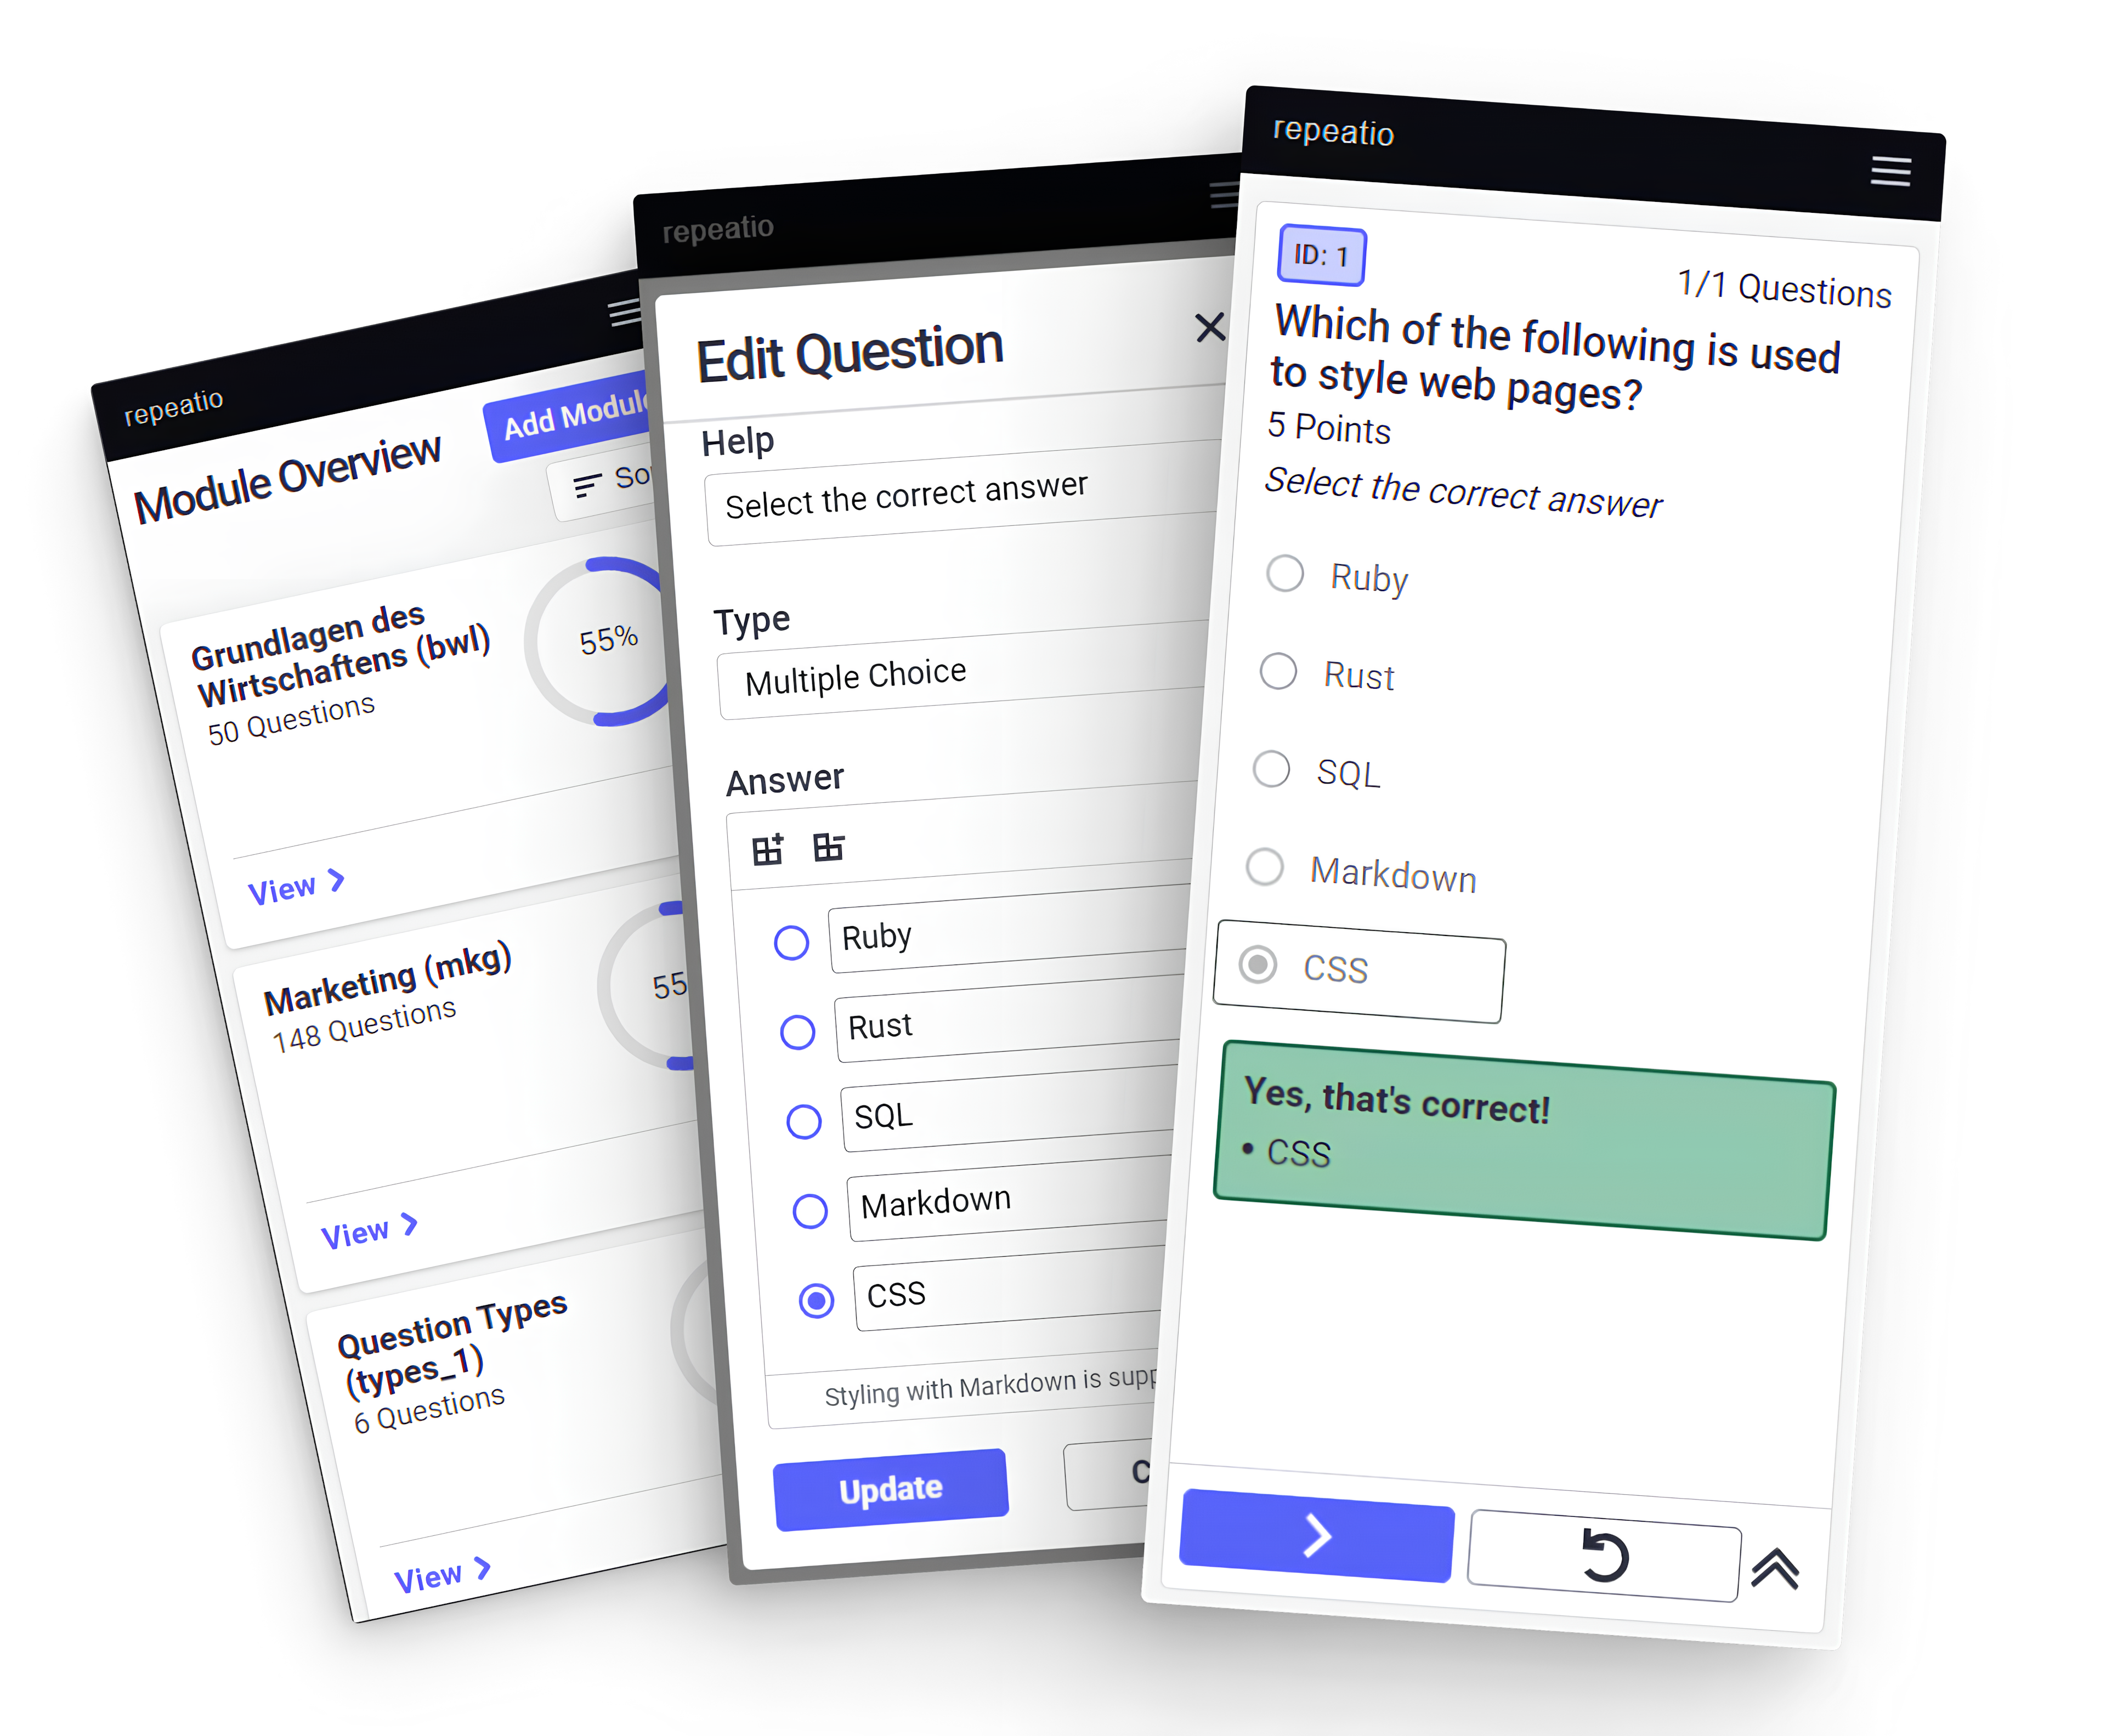 Three UI mockups in phone format for learning app. The left mockup shows the module overview with three modules. The mockup in the center displays a modal with the title Edit Question and a form with which the user can edit a question. The question type Multiple-Choice is selected an the following radio options were added: Ruby, Rust, SQL, Markdown and CSS. The radio option CSS is selected. At the bottom of the form there is a button with the text Update. On the right mockup the question from the centered mockup is displayed. The title of the question is 'Which of the following is used to style web pages?'. Below the title is the points value (5) for this question if answered correctly. In cursive below the points is a text describing what the user has to do: 'Select the correct answer'. From the radio options Ruby, Rust, SQL, Markdown and CSS the user has selected CSS. Below the options there is a green box with the text: 'Yes, that's correct!'